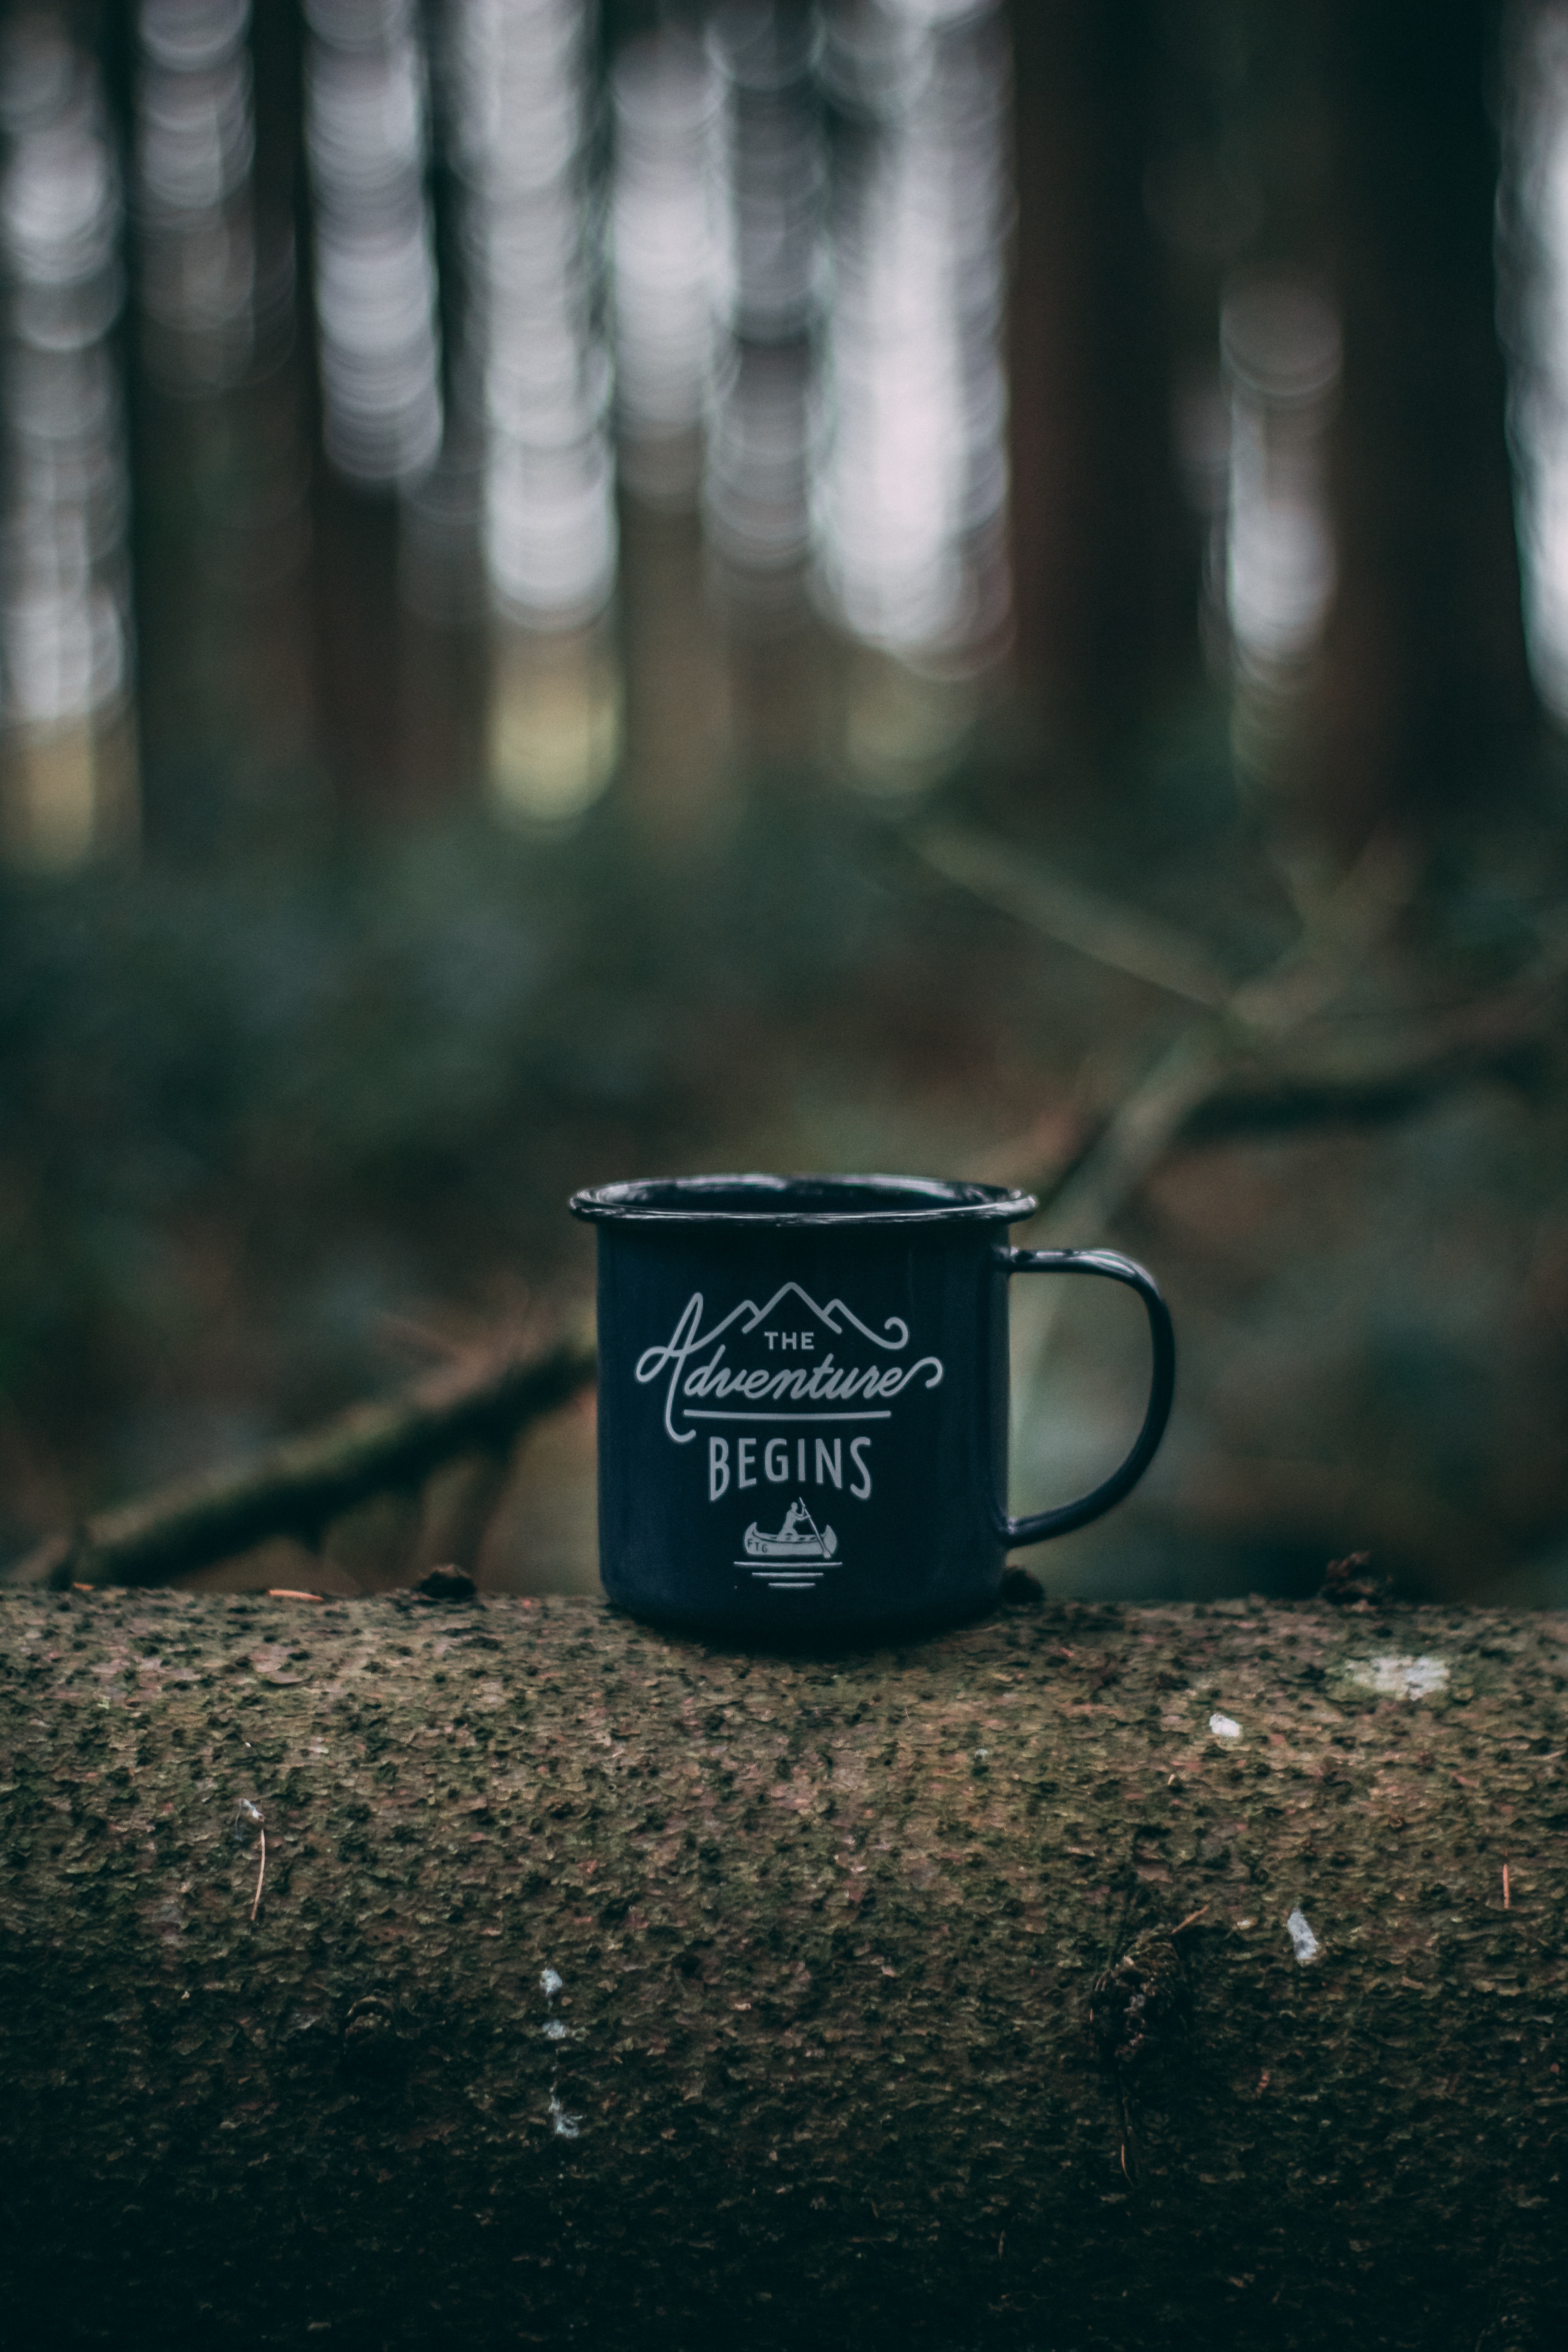 camping, words, journey, cup, campsite, mug